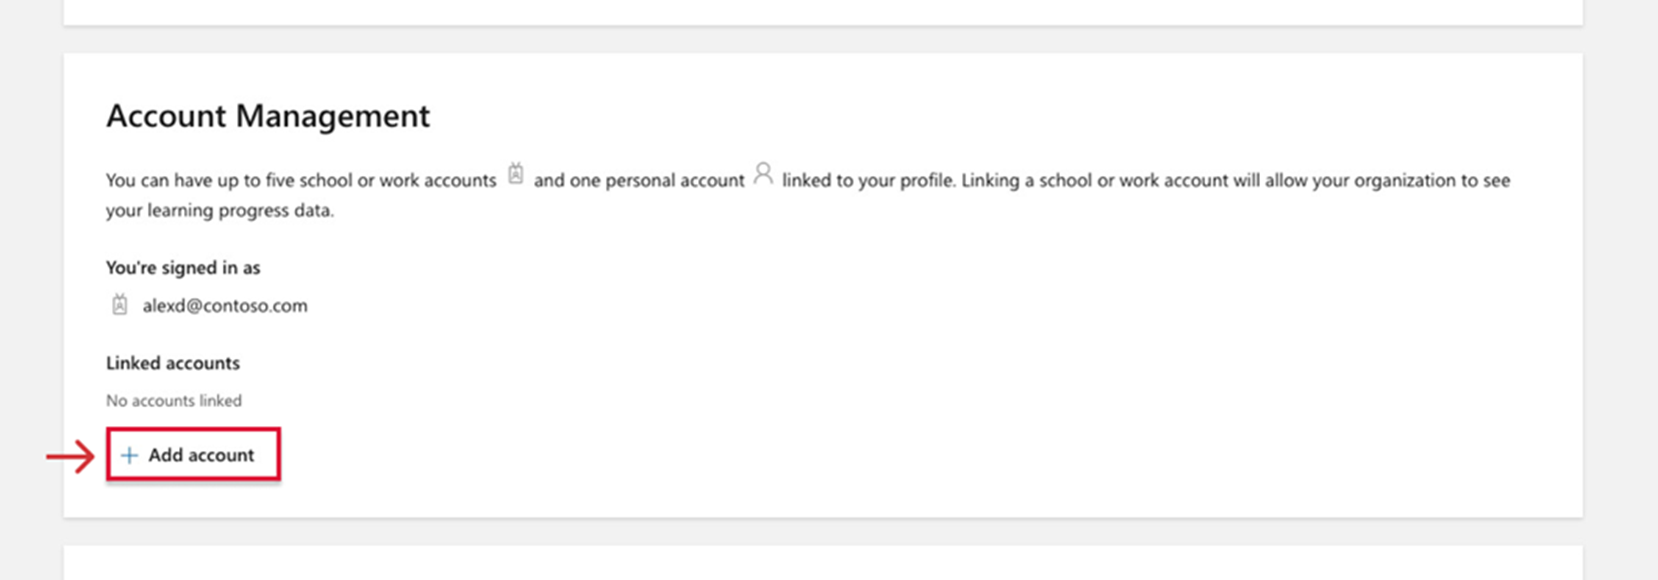 Account Management section in Learn profile settings. Add account option is highlighted.